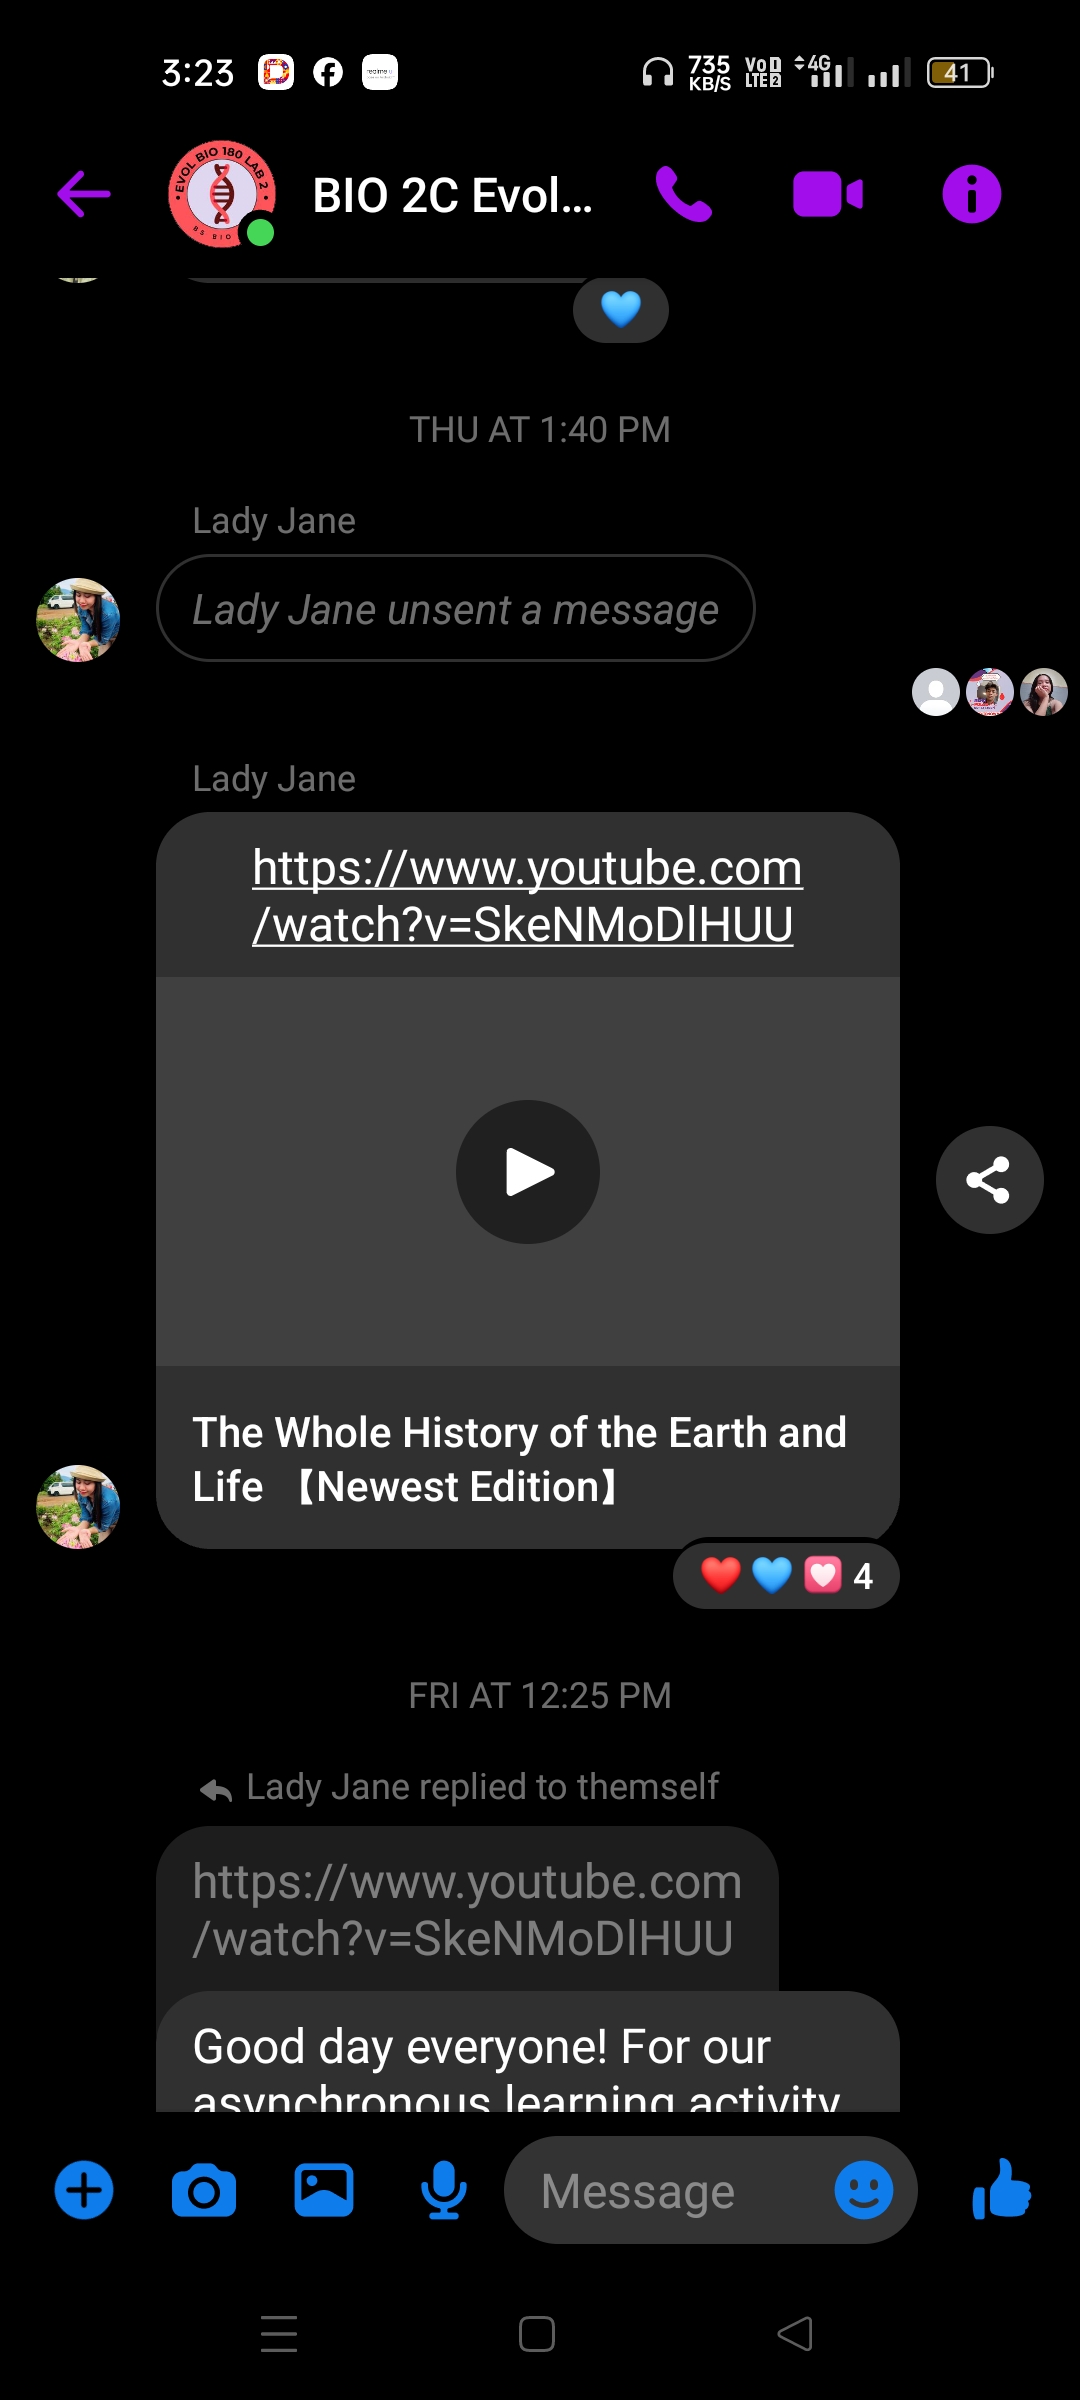 +
3:23
EVOL BIO
LAB 2
180 LAB
BIO 2C Evol...
735 VOD 4G
KB/S LTE 2
Lady Jane
THU AT 1:40 PM
Lady Jane unsent a message
Lady Jane
https://www.youtube.com
/watch?v=SkeNMODIHUU
The Whole History of the Earth and
Life 【Newest Edition]
FRI AT 12:25 PM
Lady Jane replied to themself
https://www.youtube.com
/watch?v=SkeNMODIHUU
Good day everyone! For our
asynchronous learning activity
Message
|||
4
41
-●
.